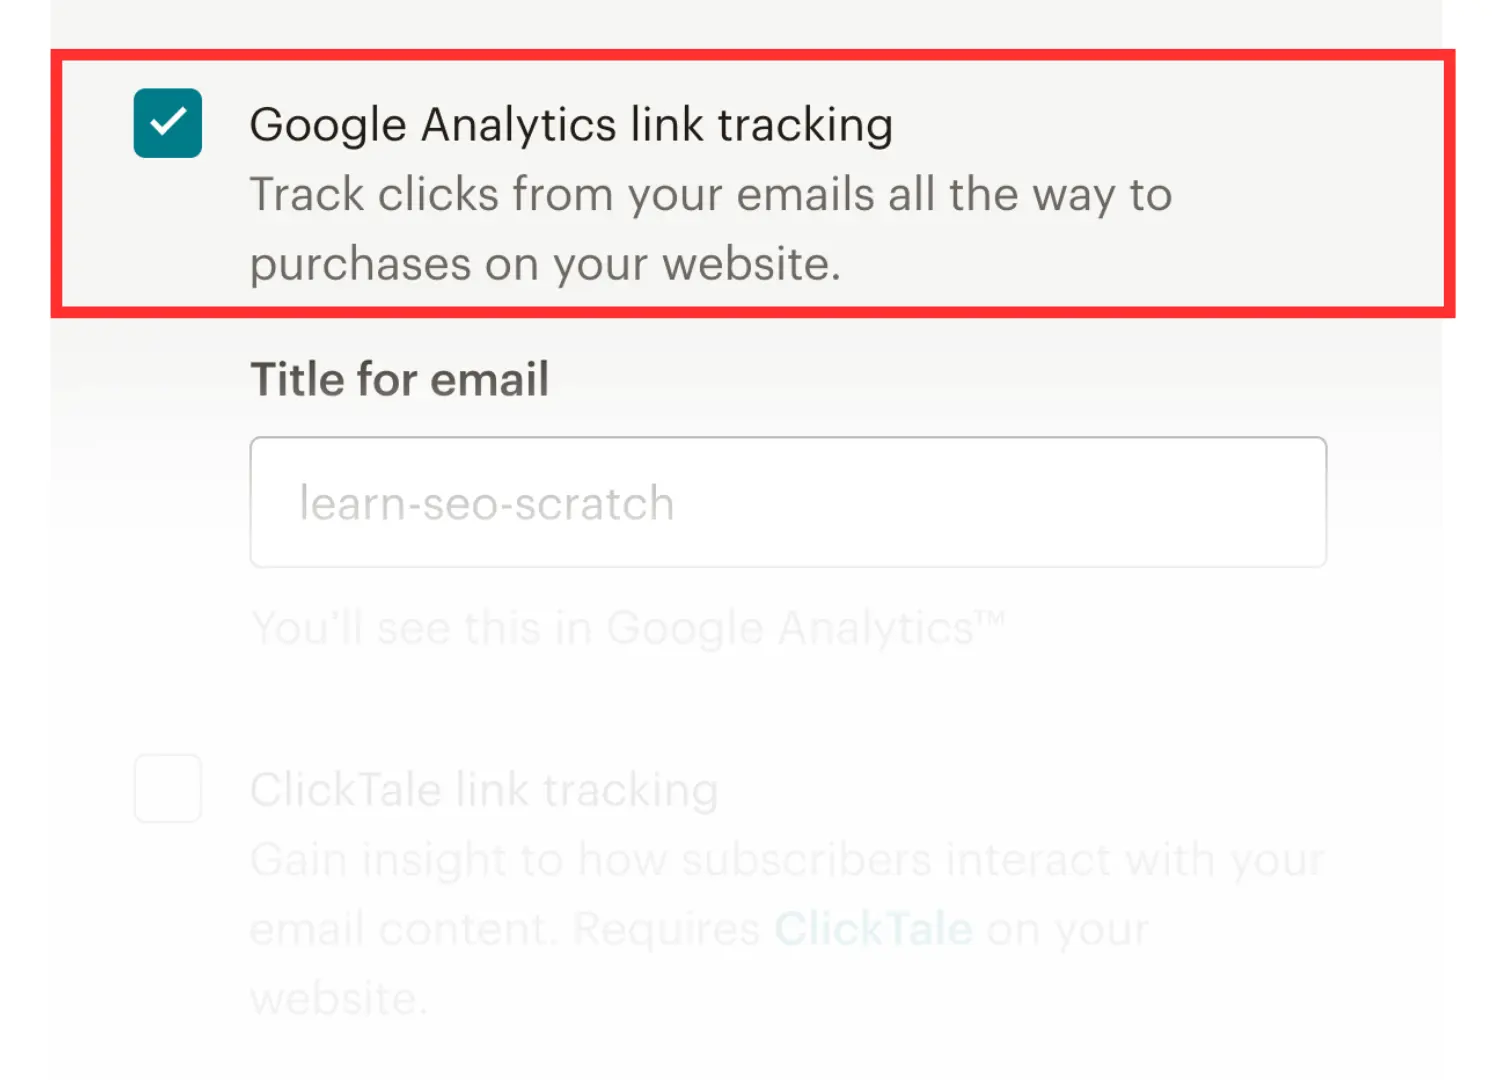 Connect Your Emails to Google Analytics